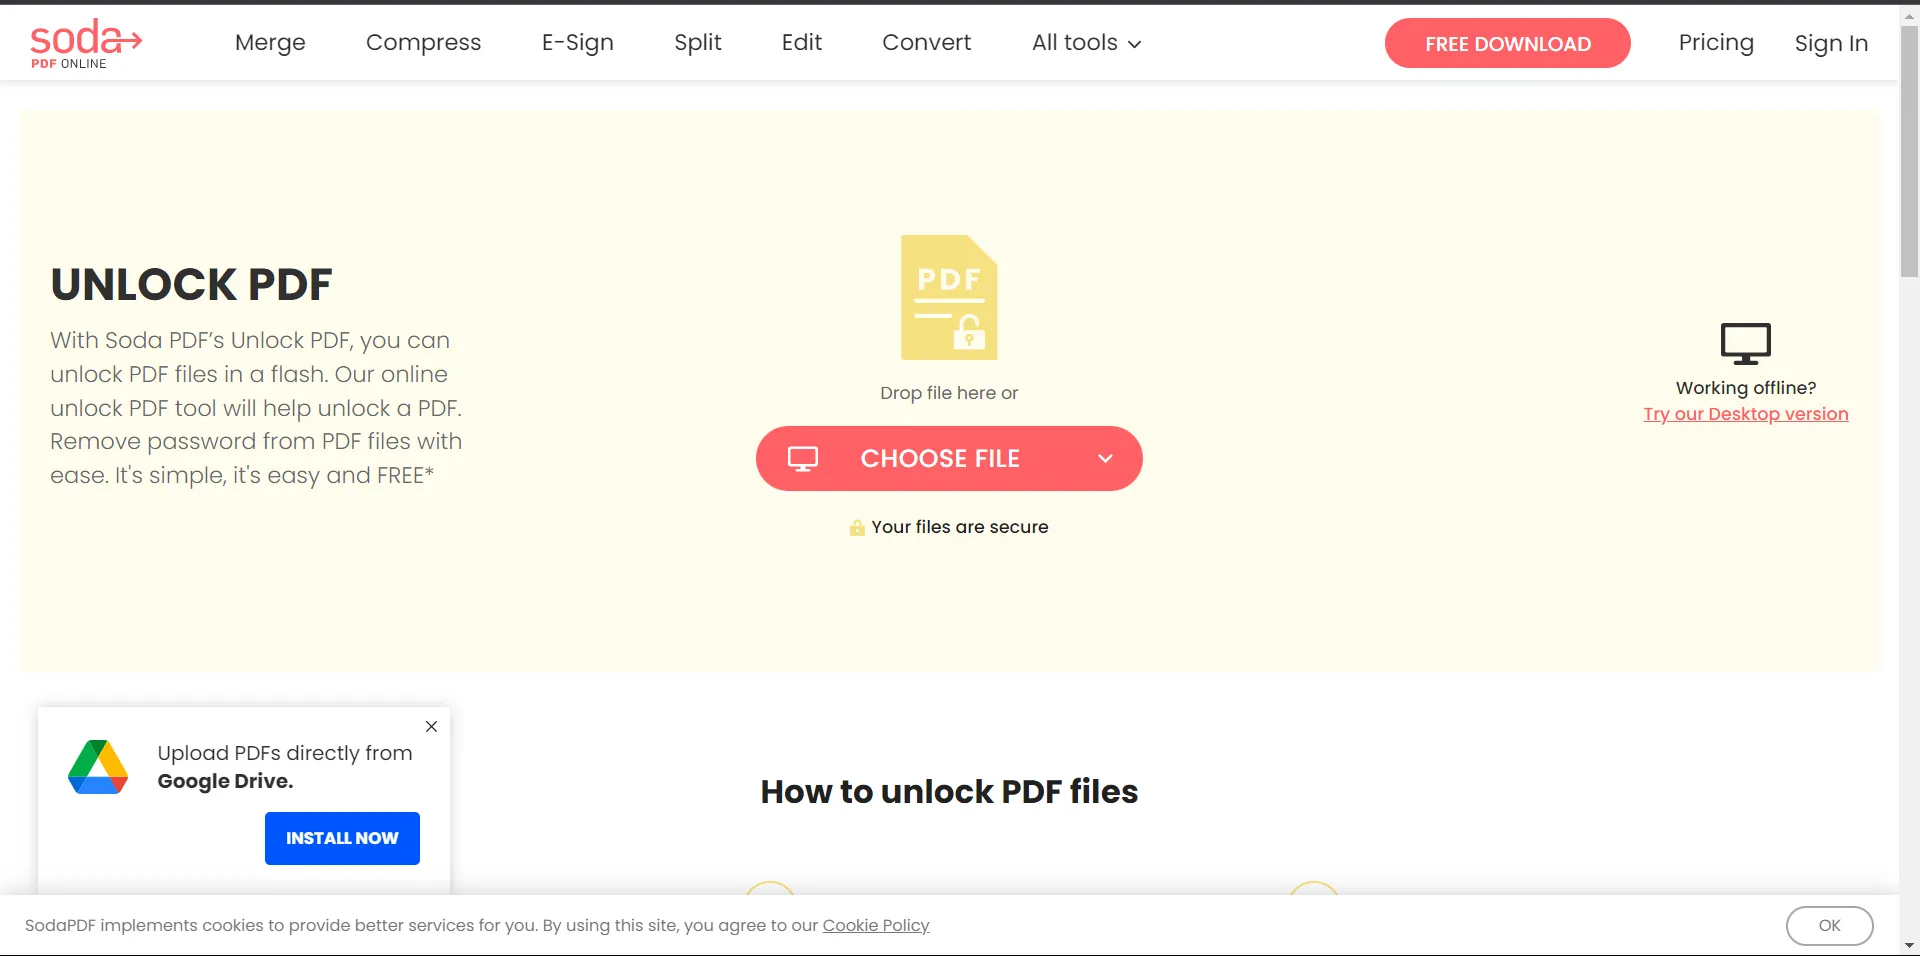 How to Remove a Password from a PDF File, Figure 12: Soda PDF